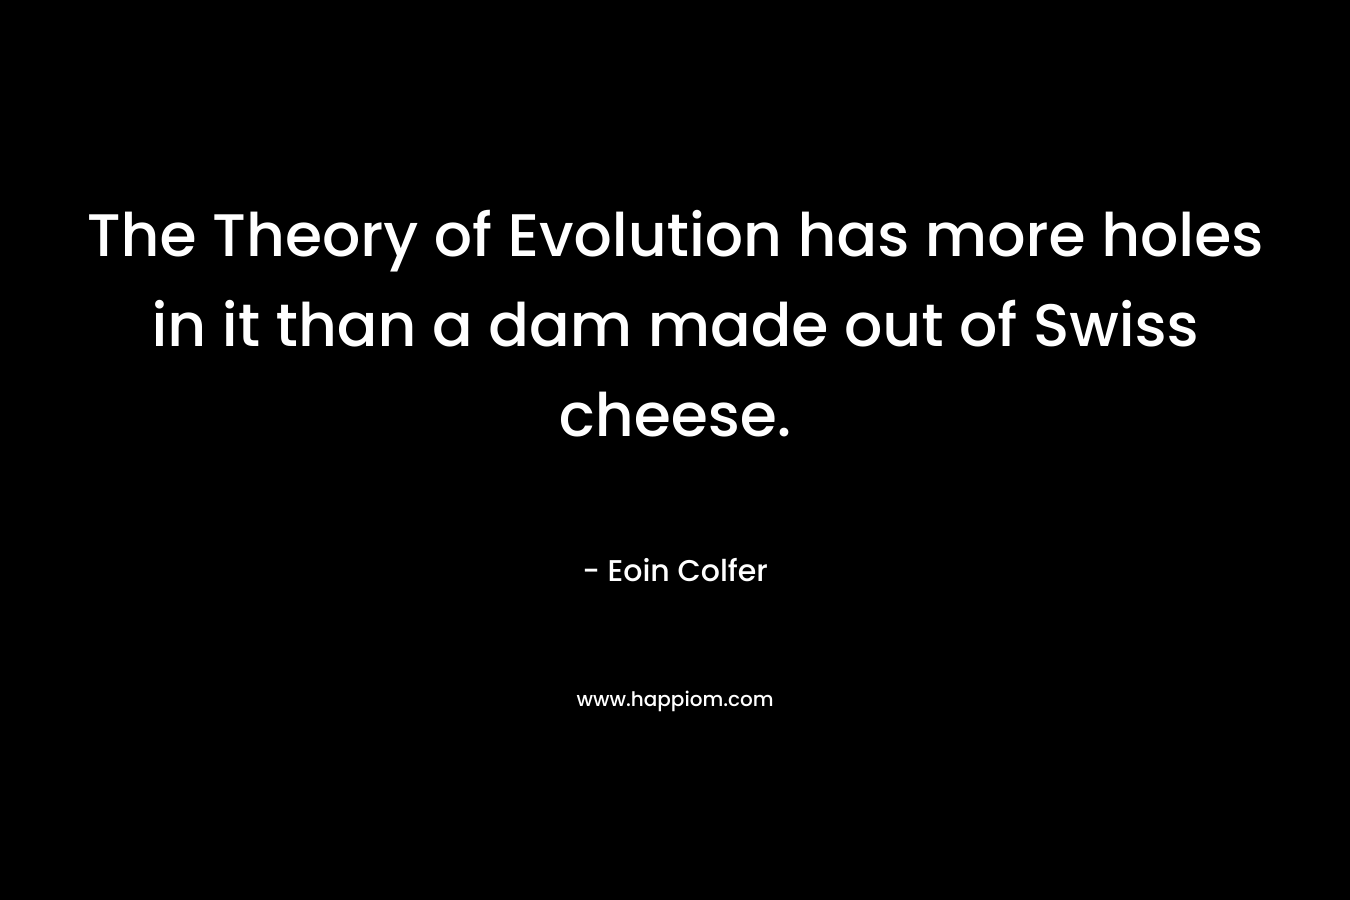 The Theory of Evolution has more holes in it than a dam made out of Swiss cheese.